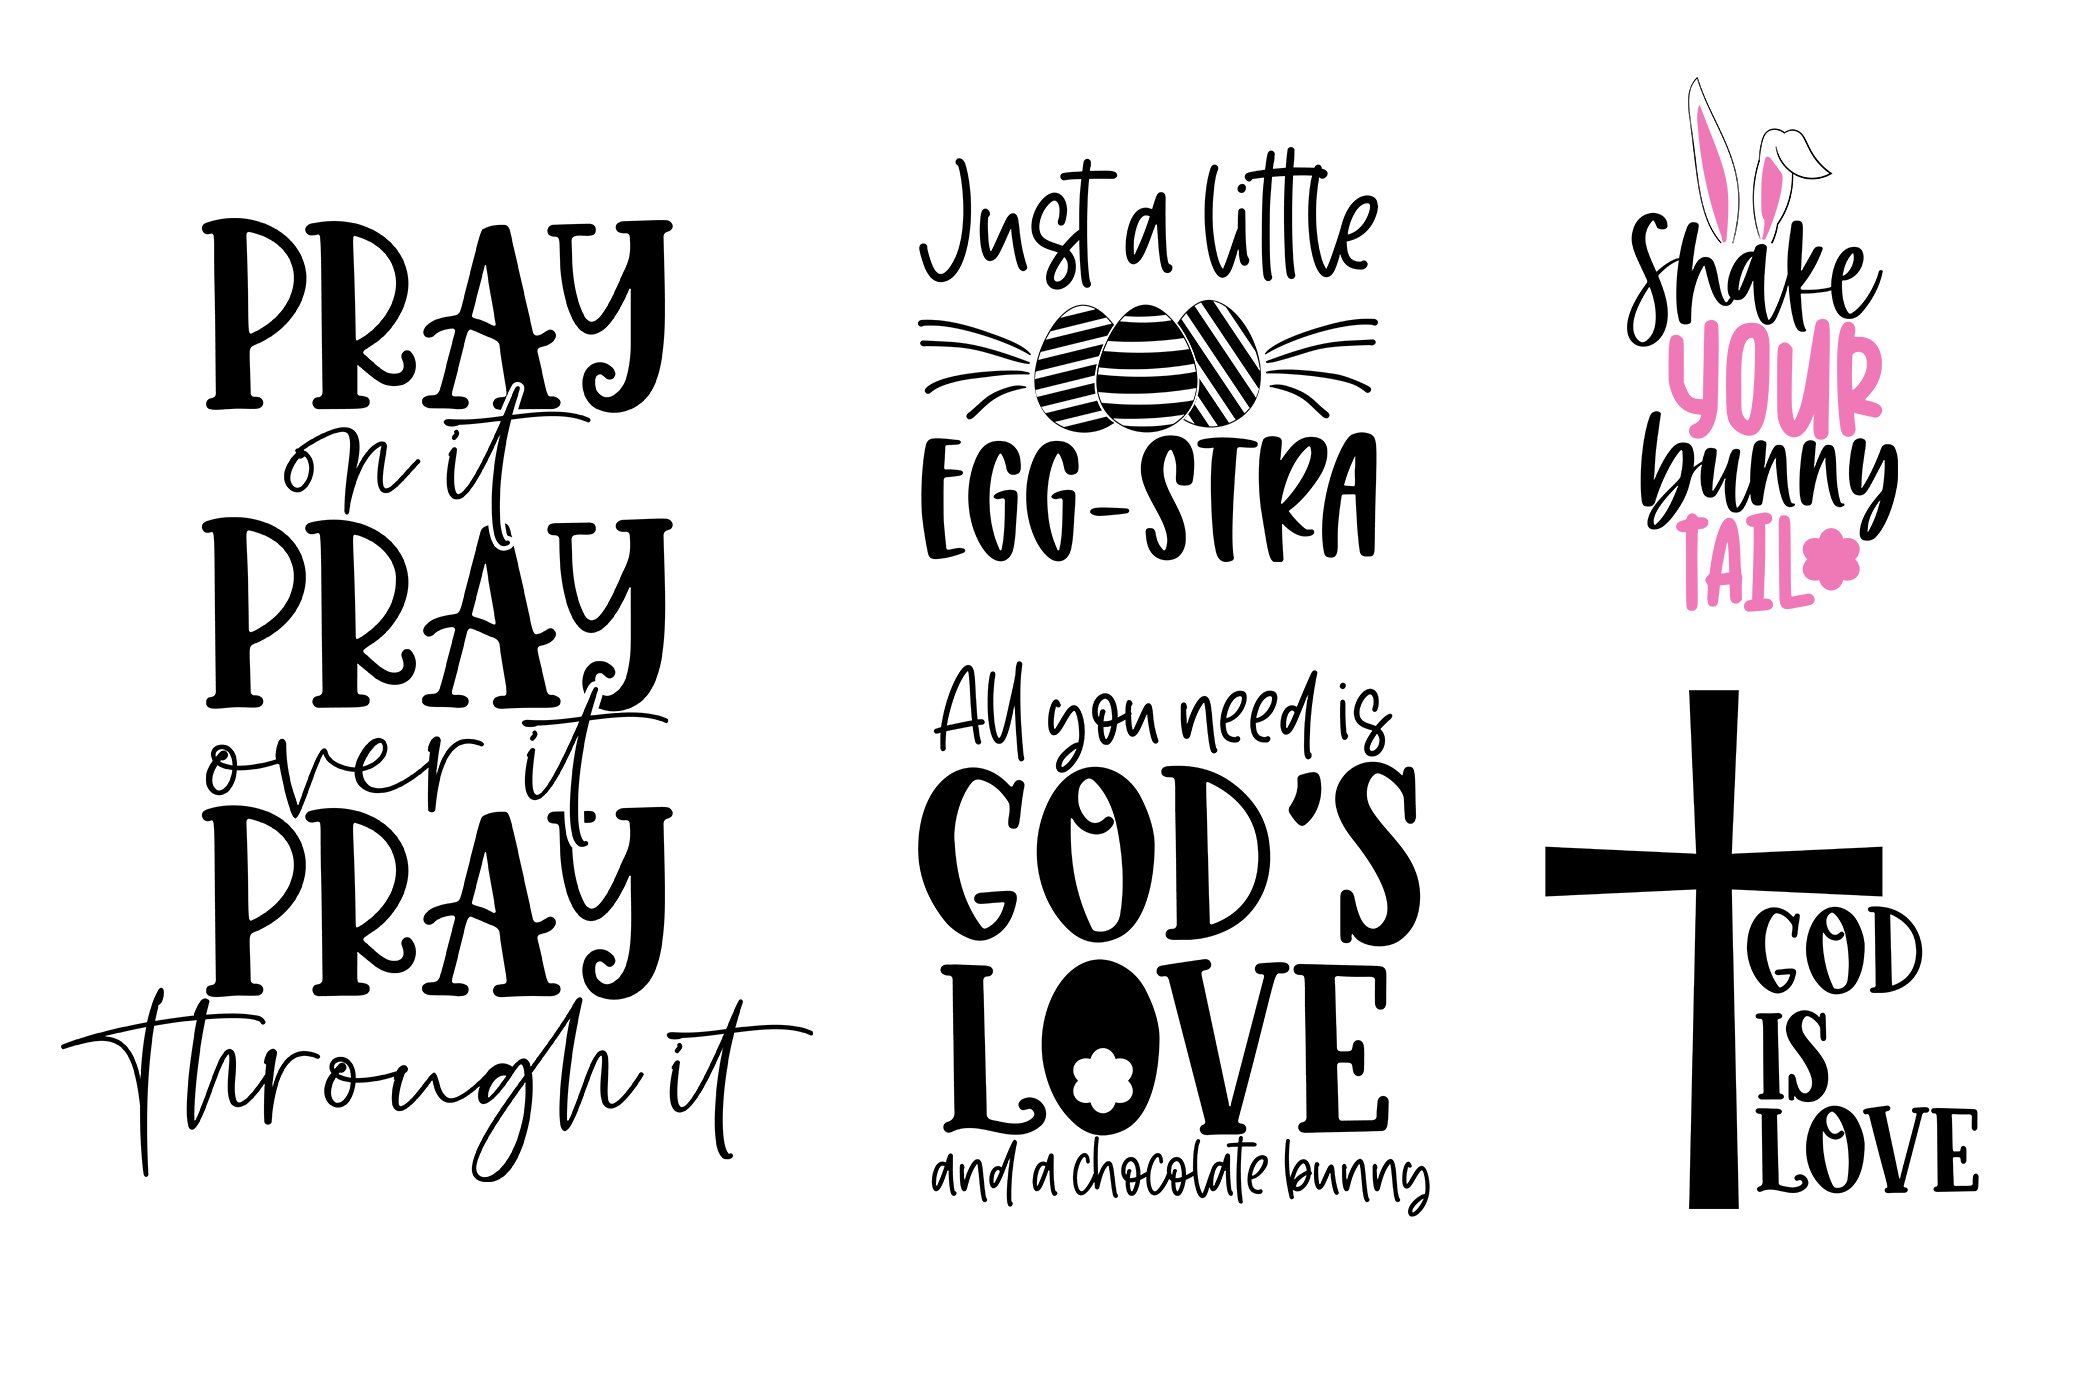 Set of four different religious sayings.